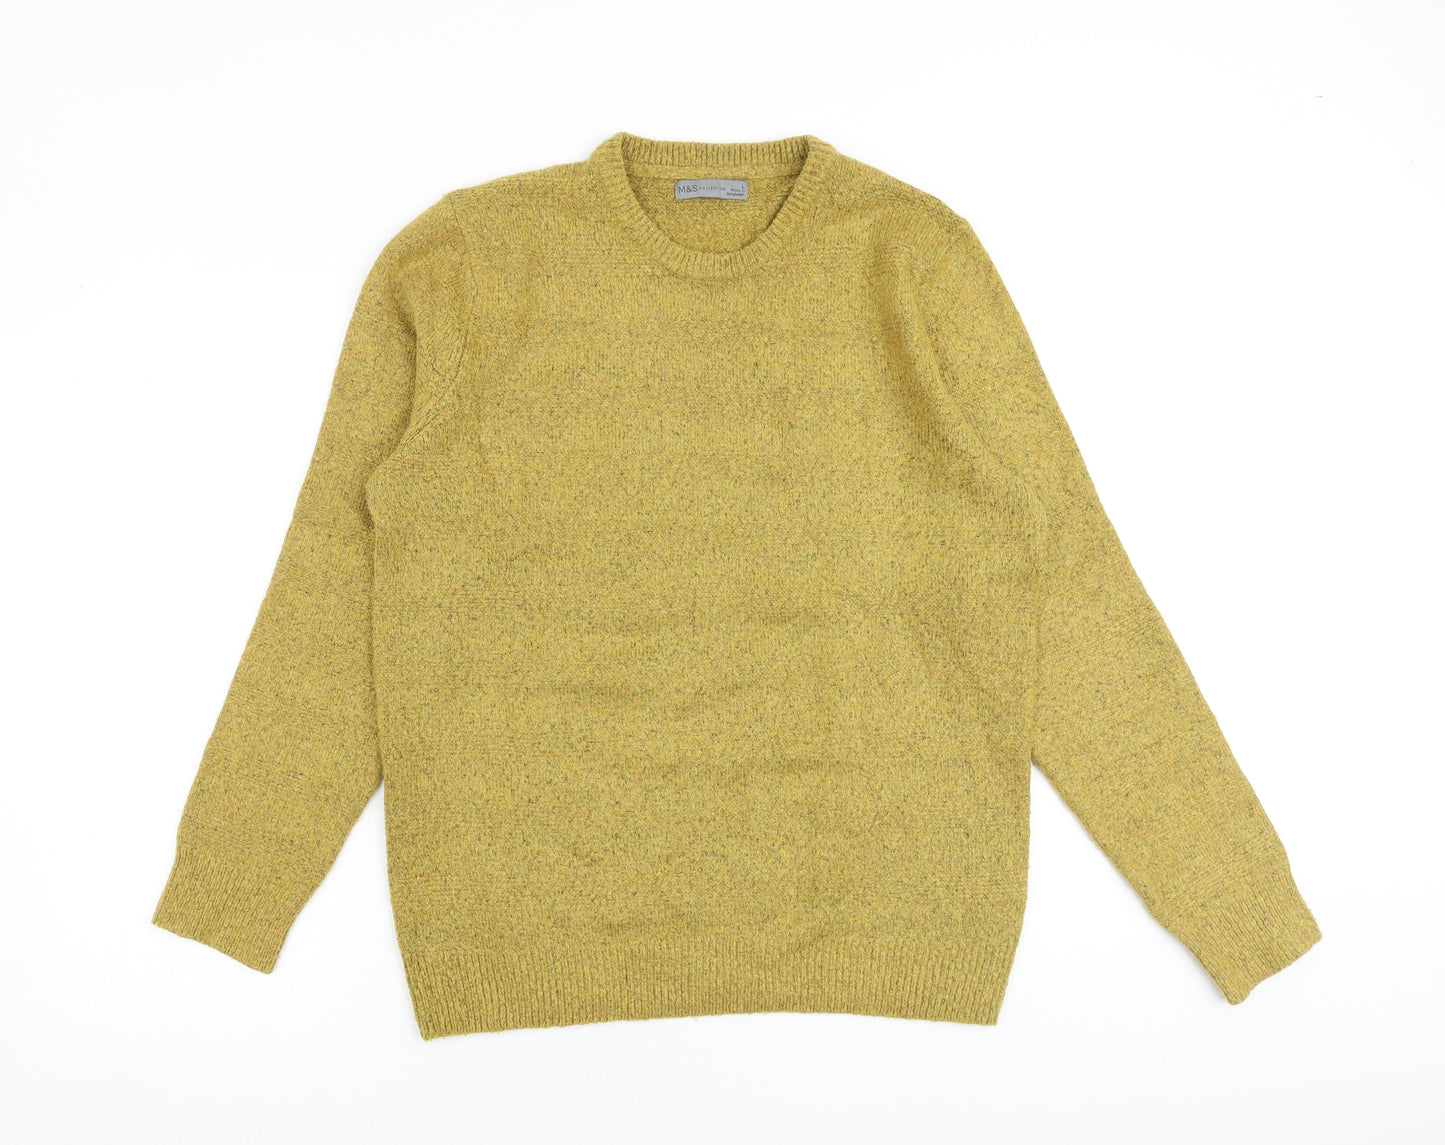 Marks and Spencer Mens Yellow Round Neck Acrylic Pullover Jumper Size L Long Sleeve